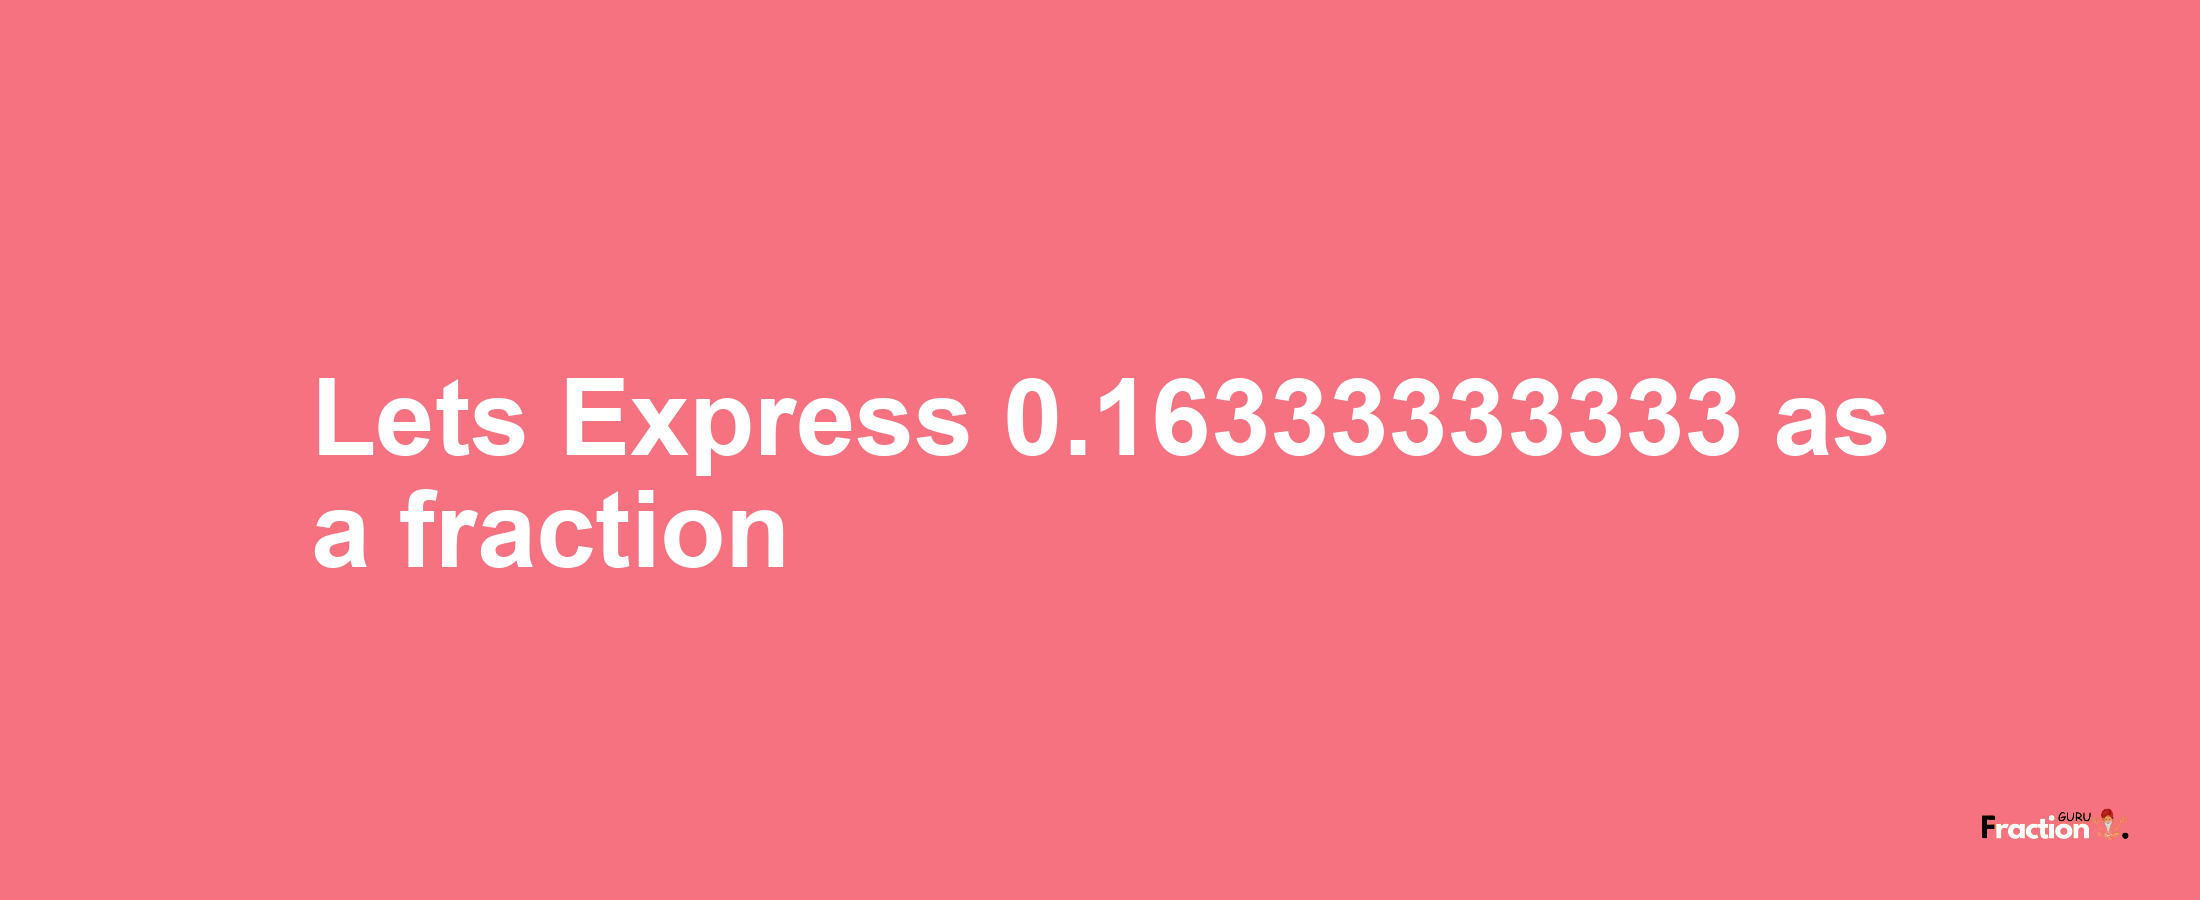 Lets Express 0.16333333333 as afraction